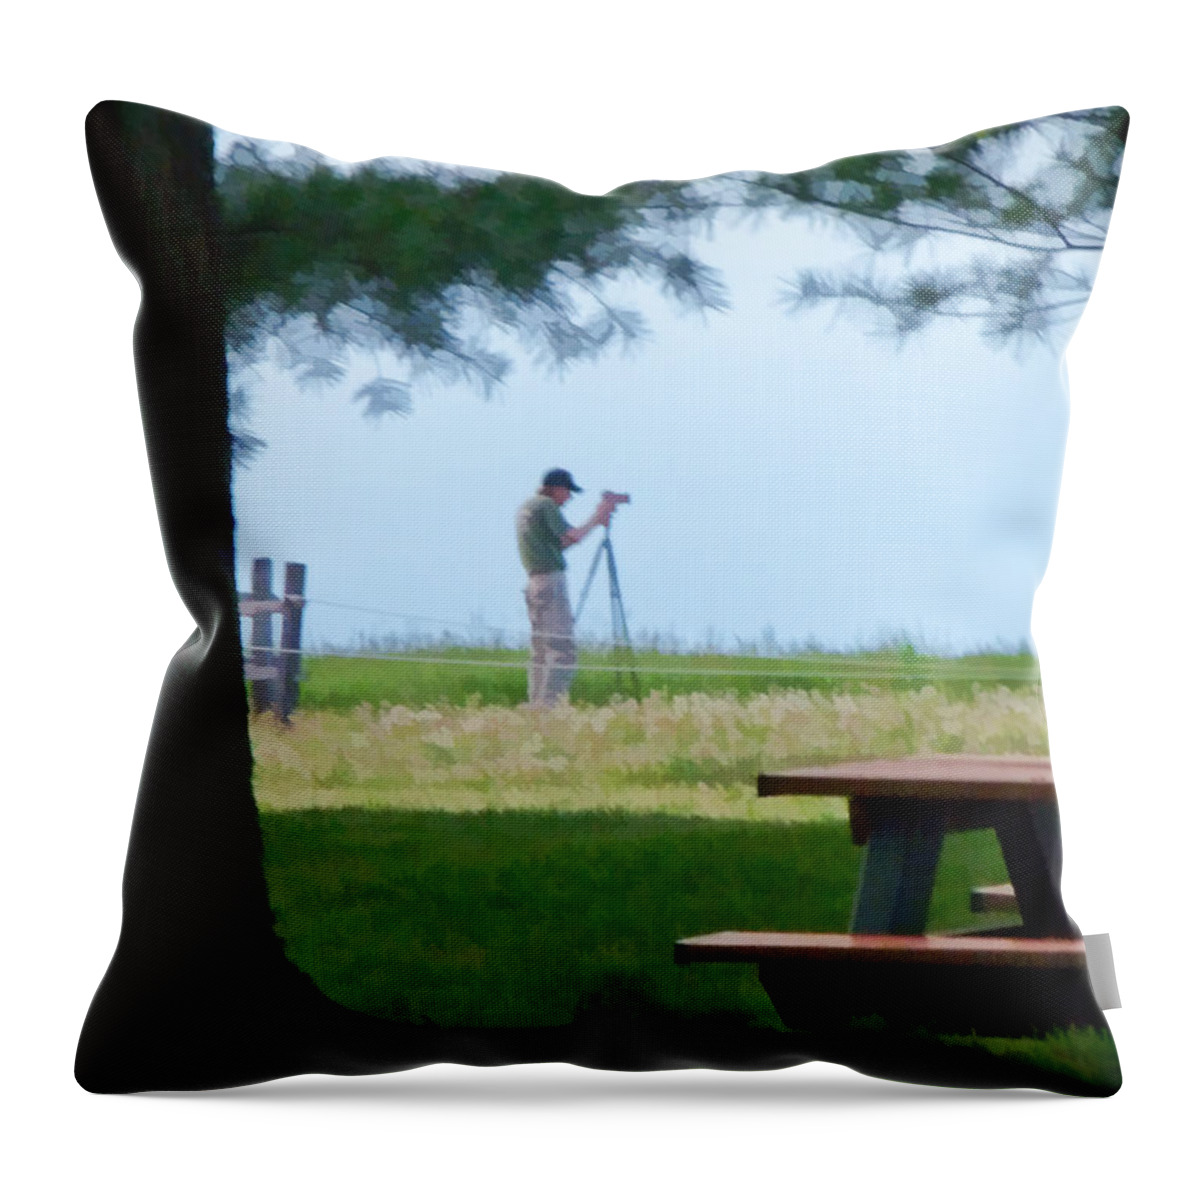 Photography Throw Pillow featuring the photograph Getting The Shot by Beth Sawickie